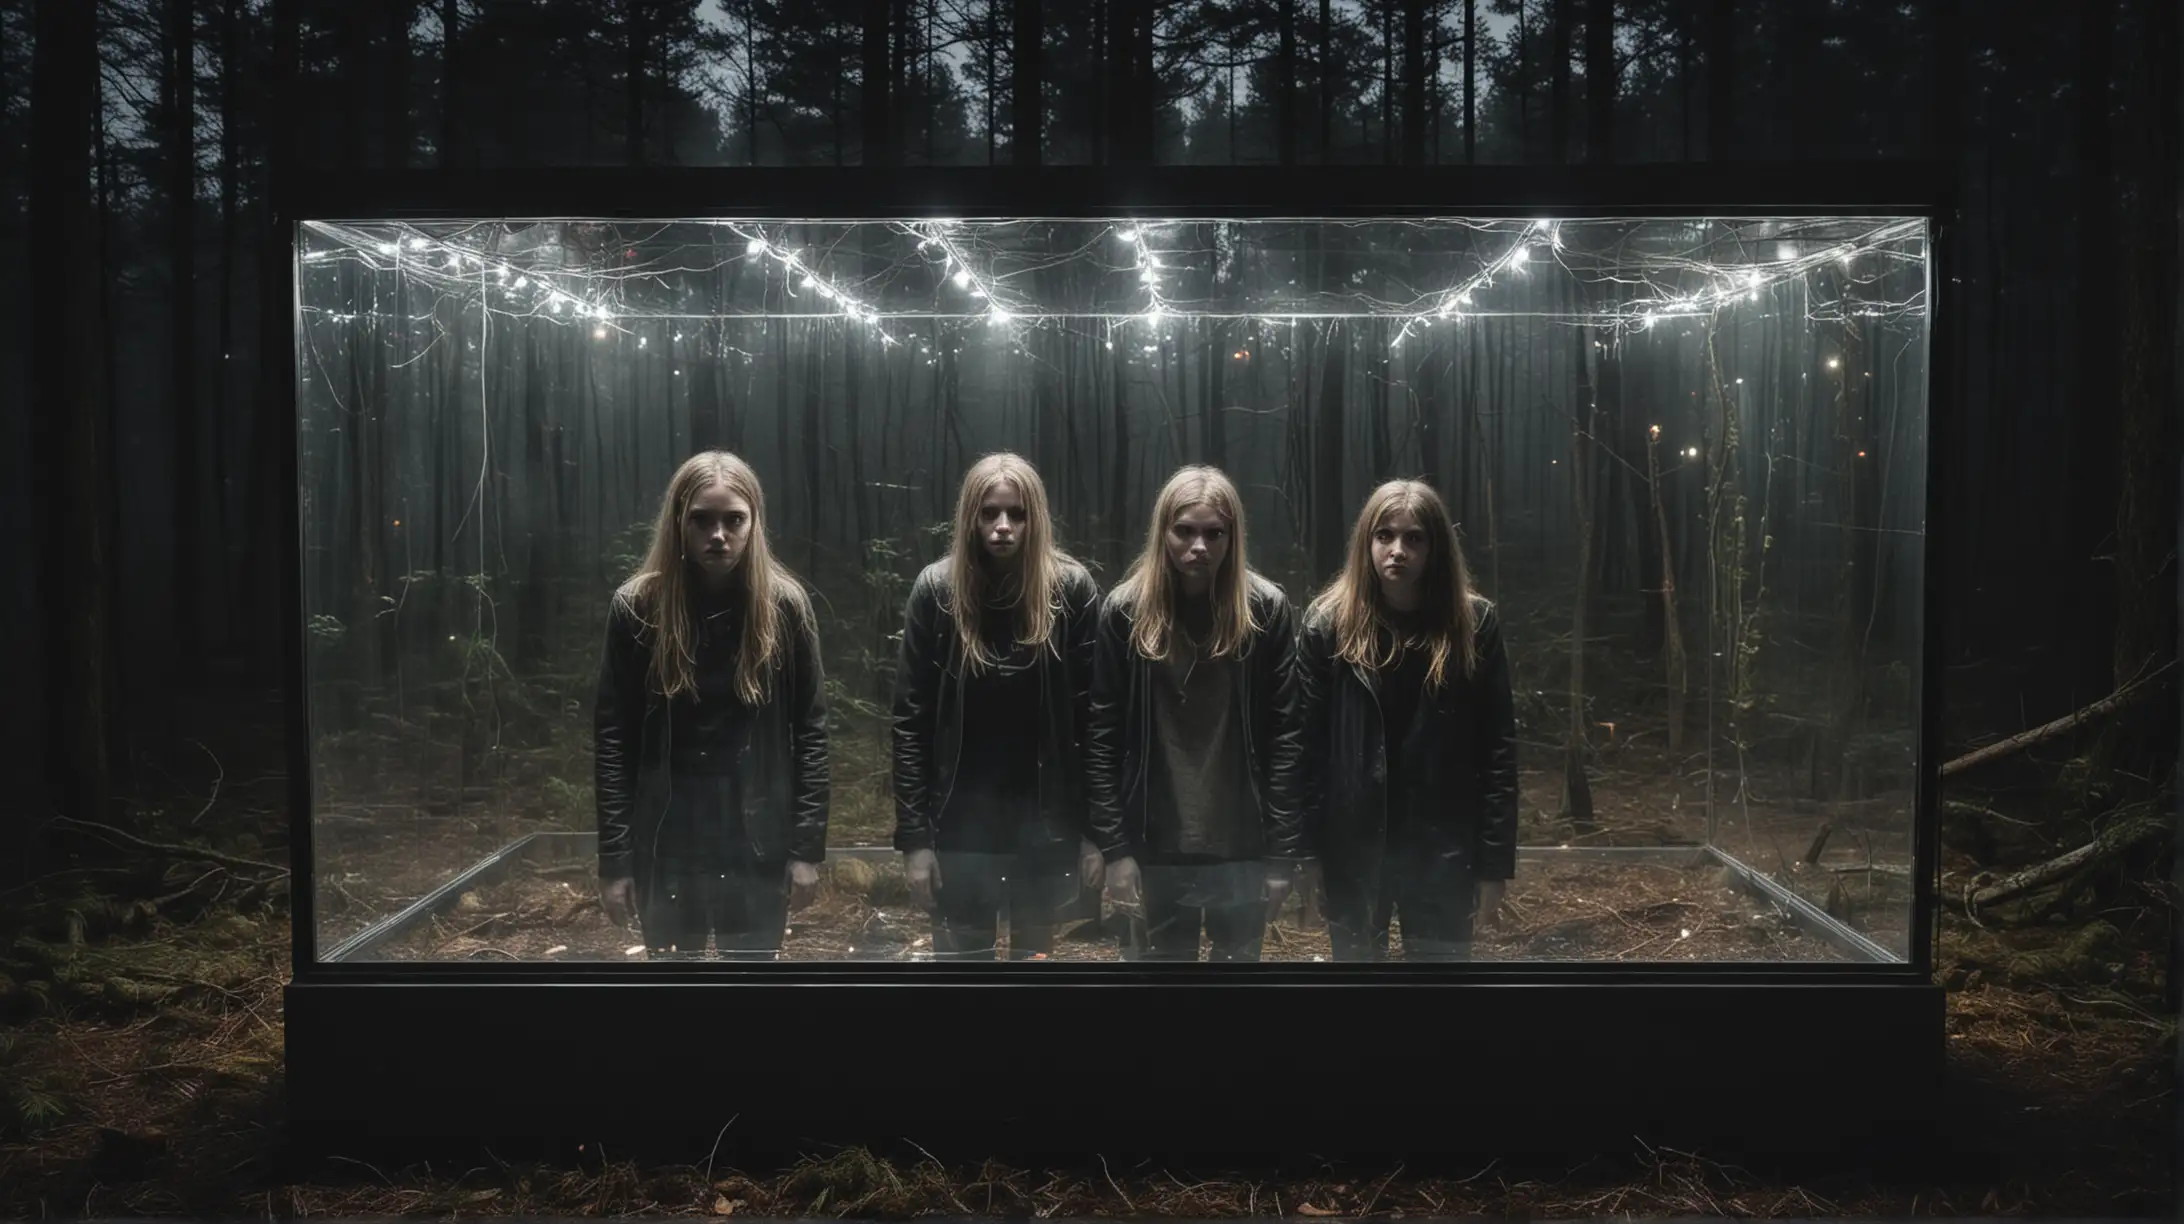 4 people in a glass box with lights on looking  towards the picture.

Very dark scary  Forrest back ground 



